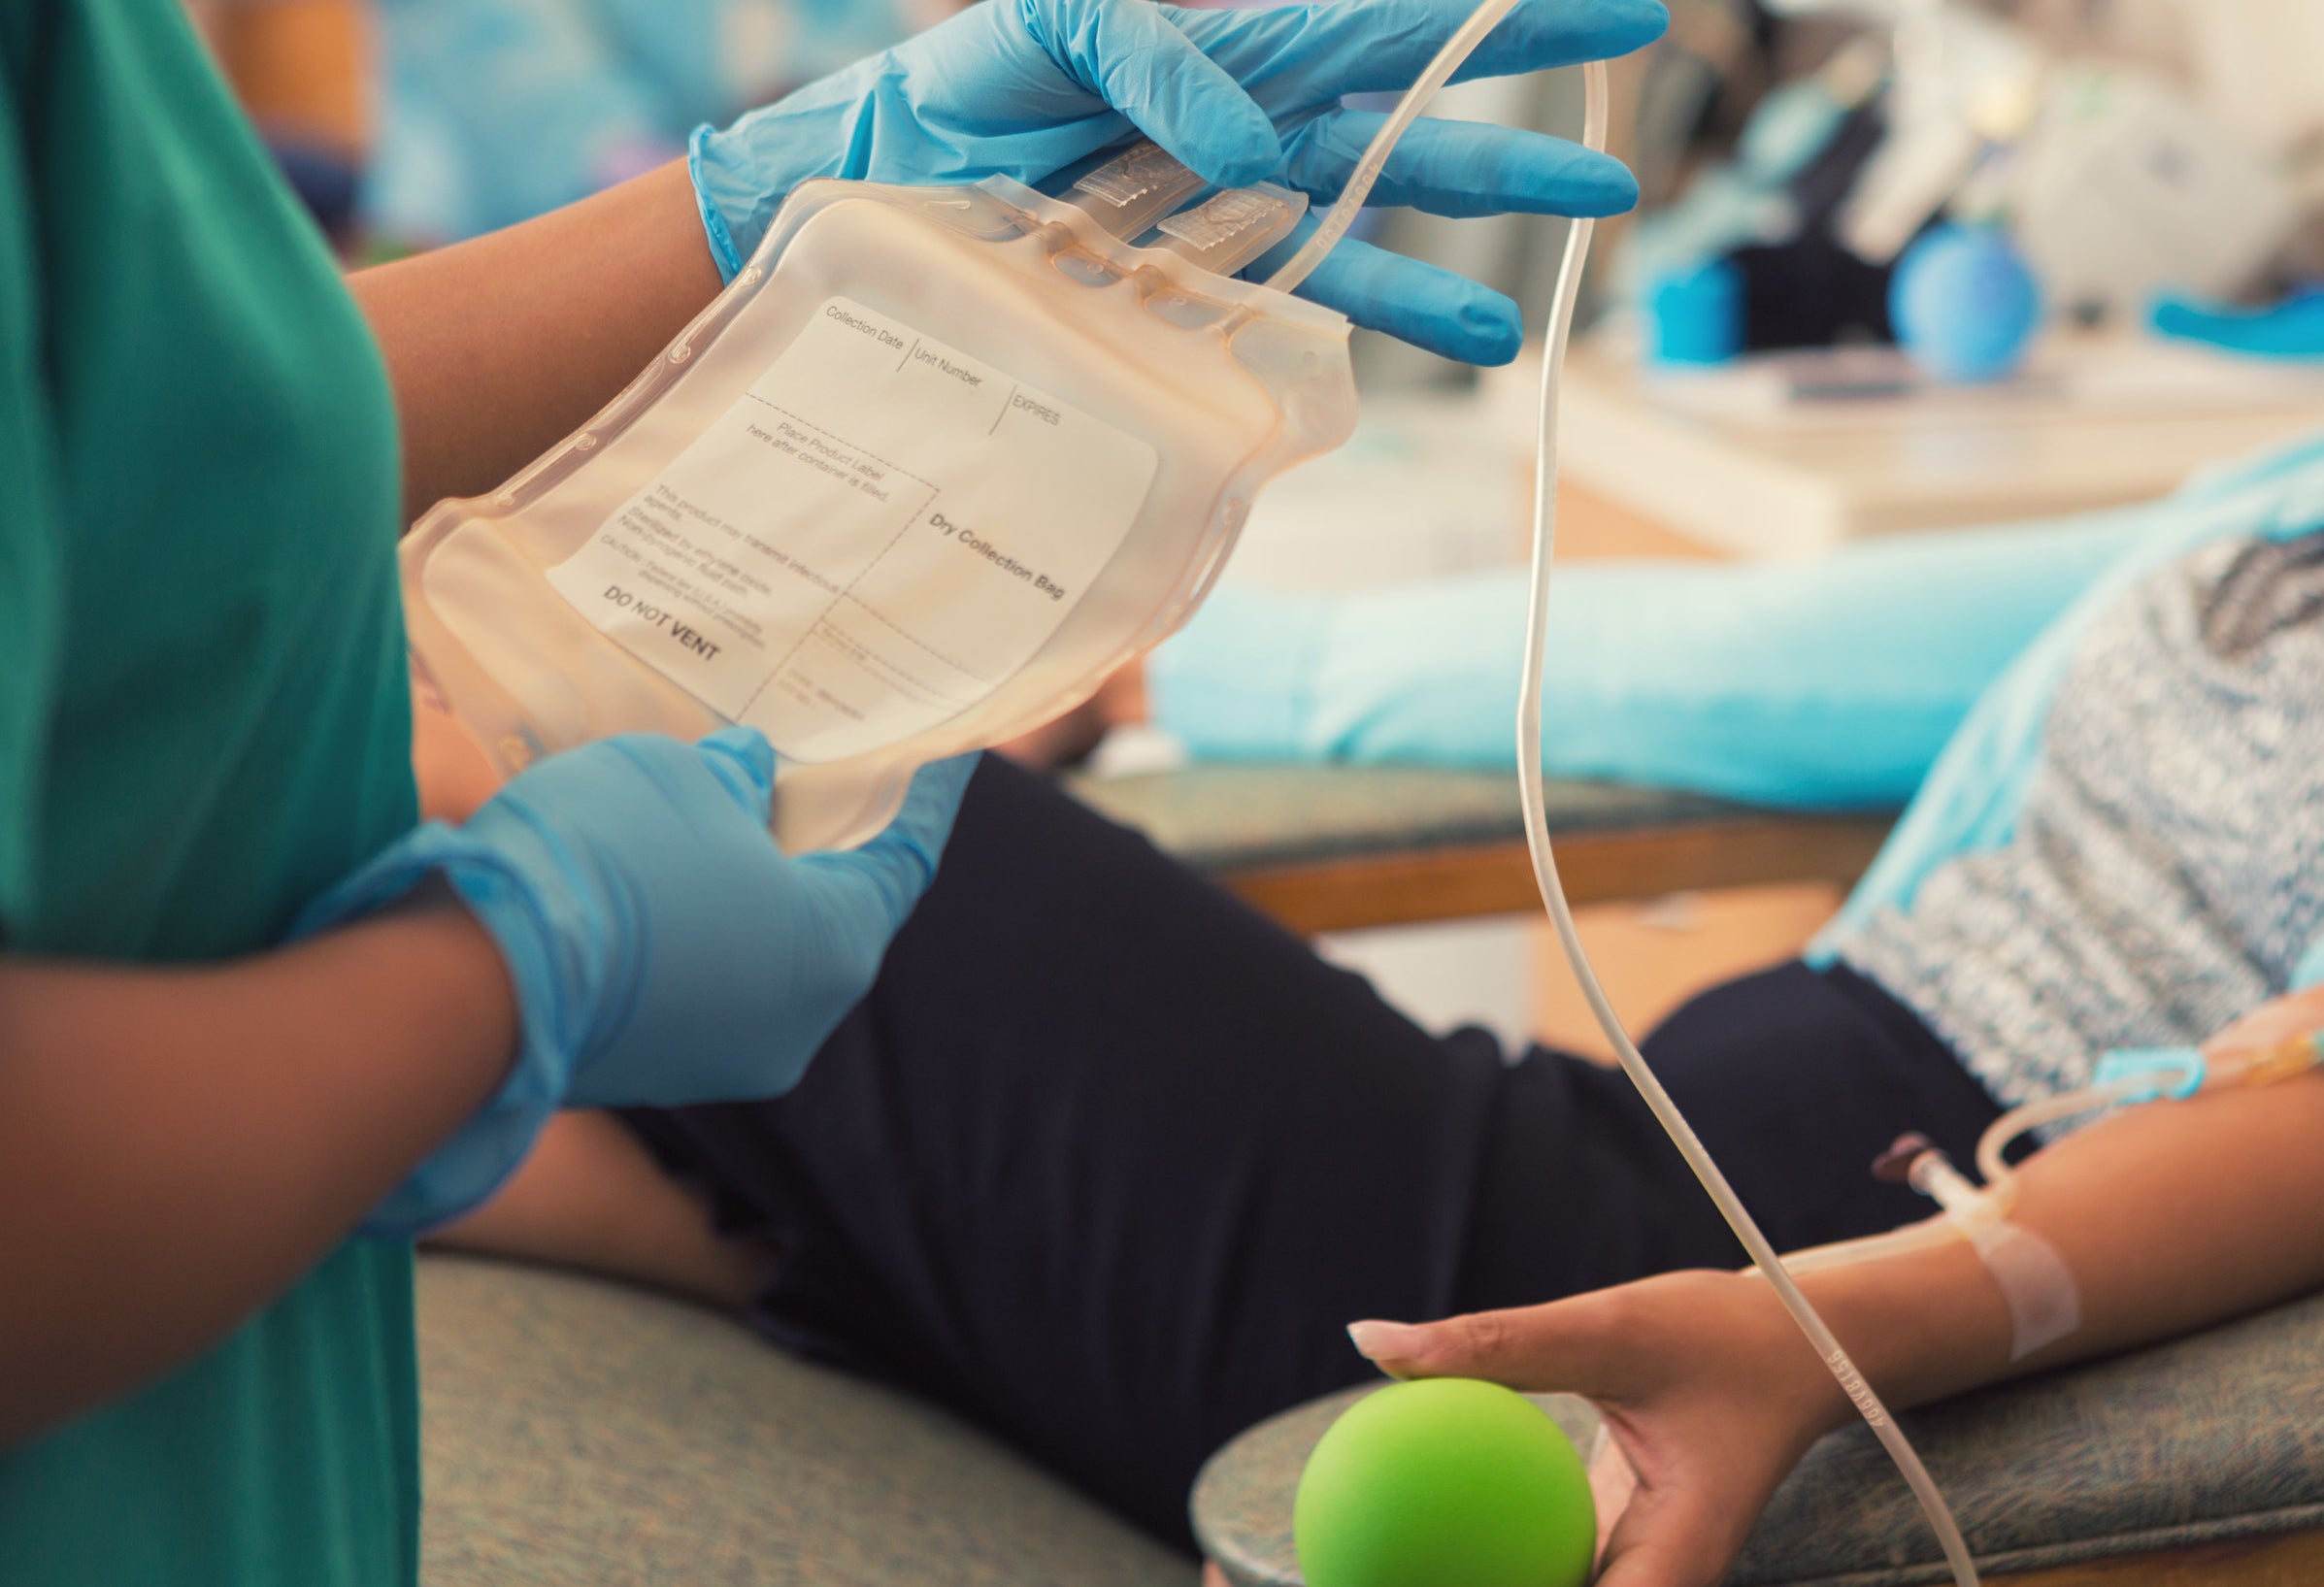 A patient donating blood